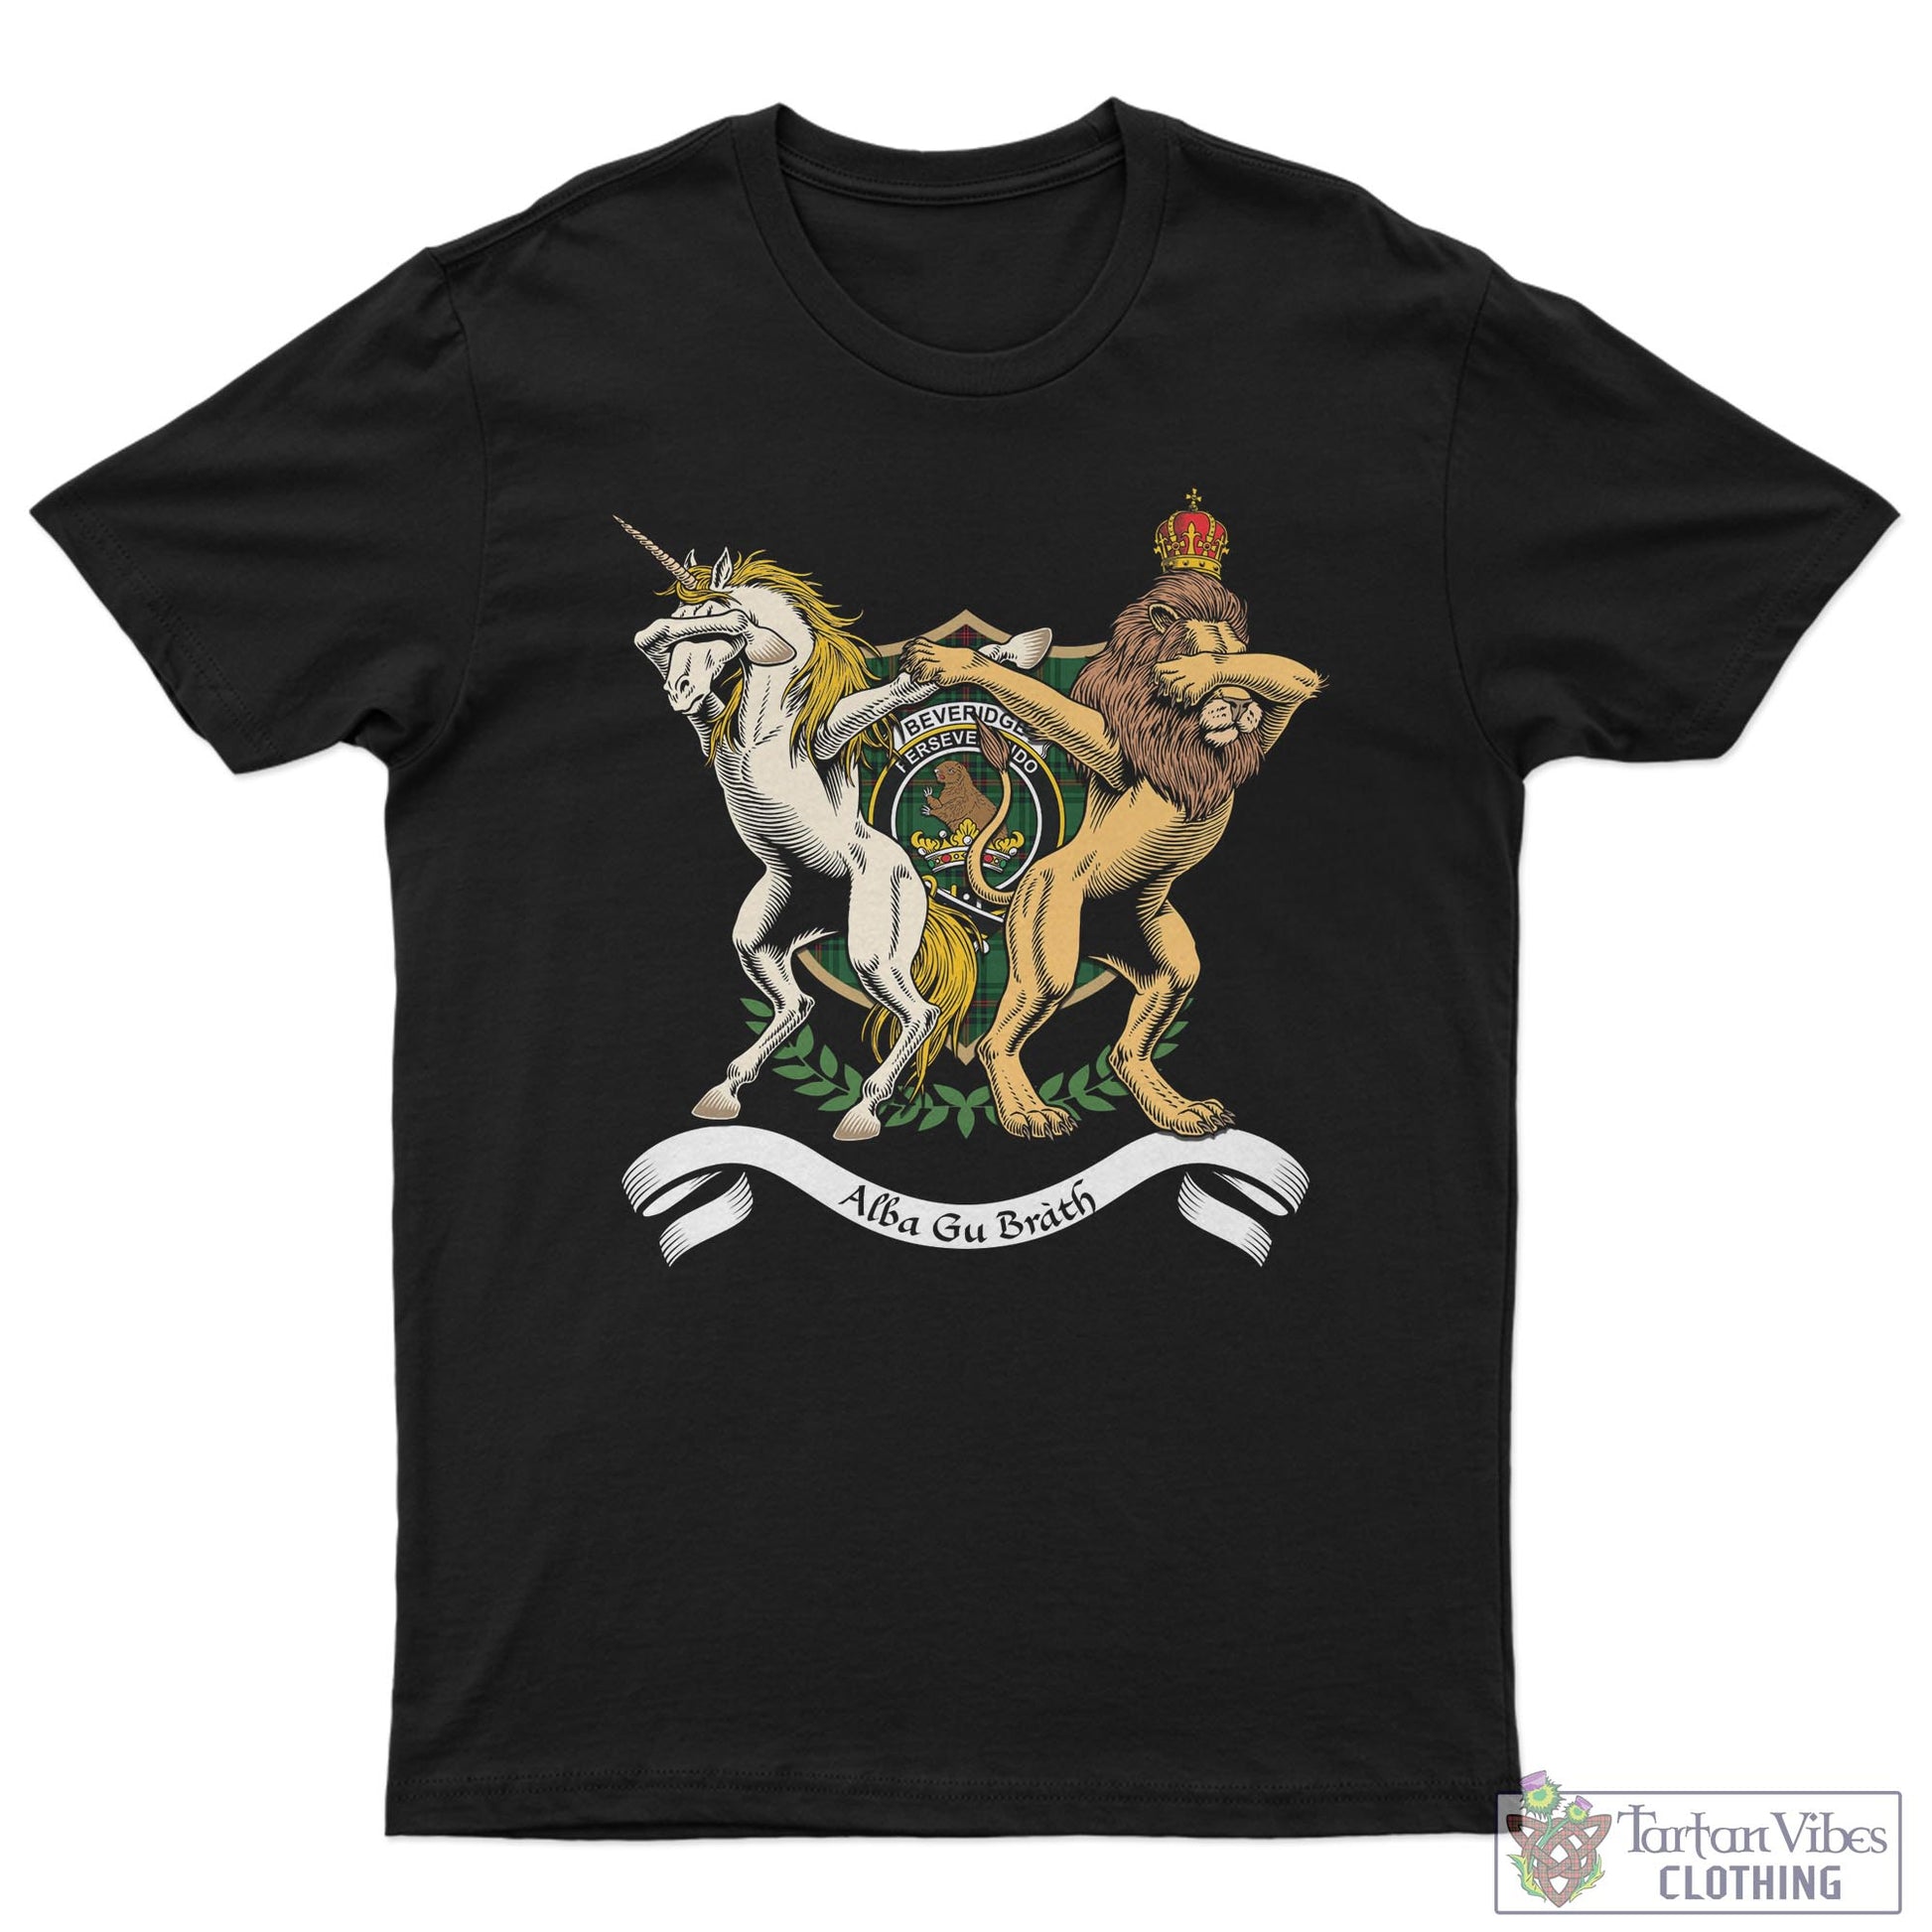 Tartan Vibes Clothing Beveridge Family Crest Cotton Men's T-Shirt with Scotland Royal Coat Of Arm Funny Style